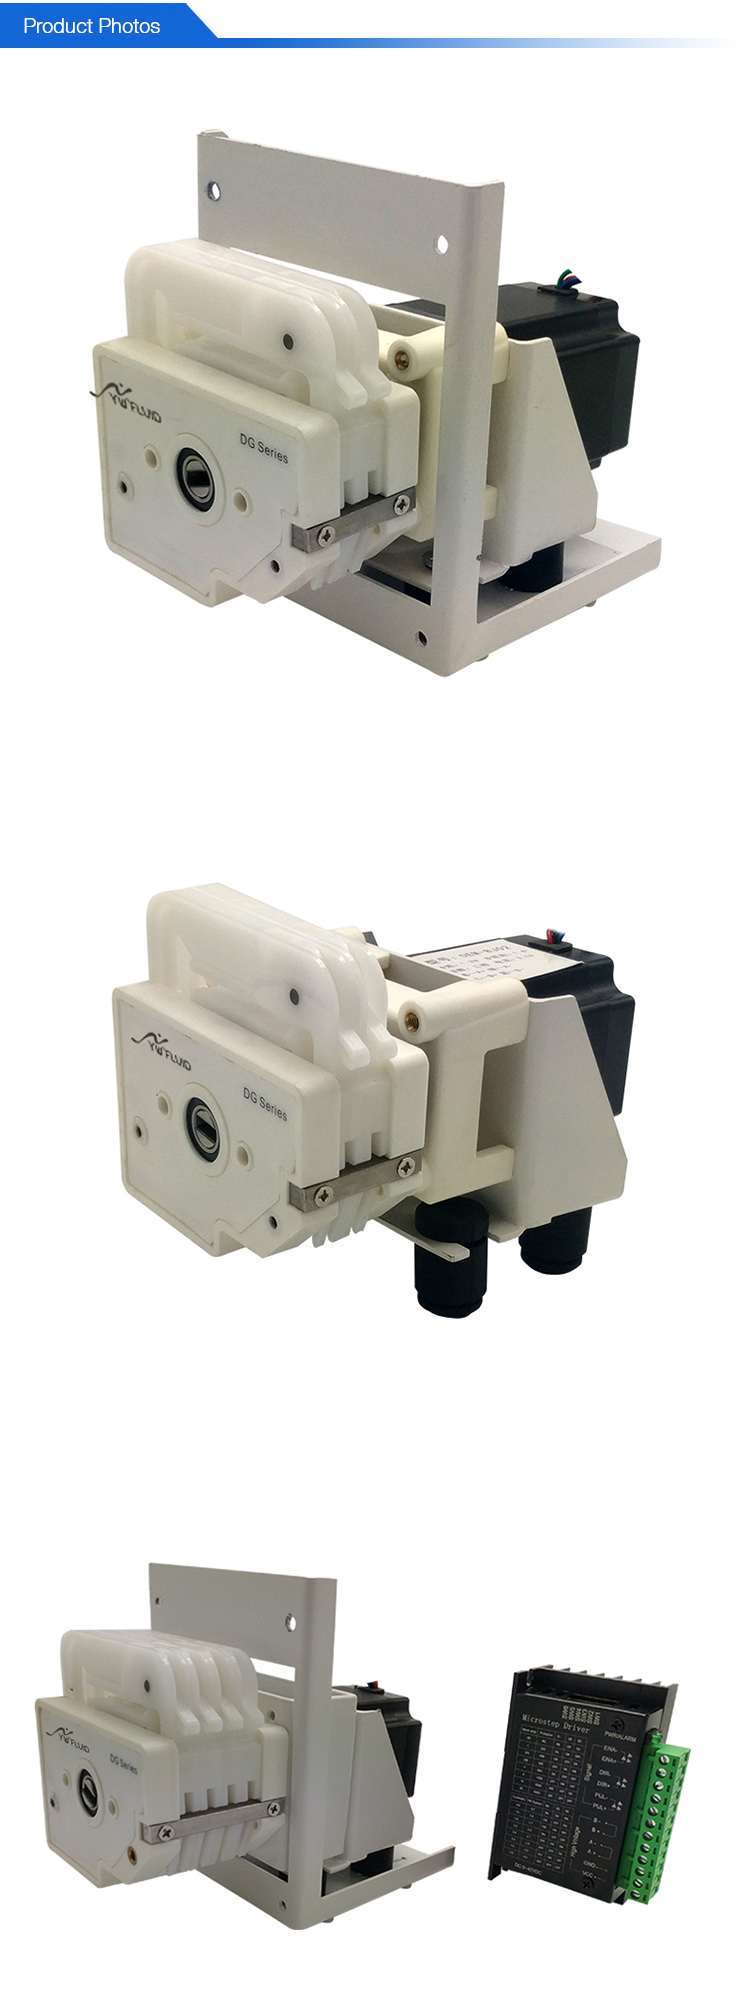 YWfluid Multichannel peristaltic pump Used for Fluid transport and distribution